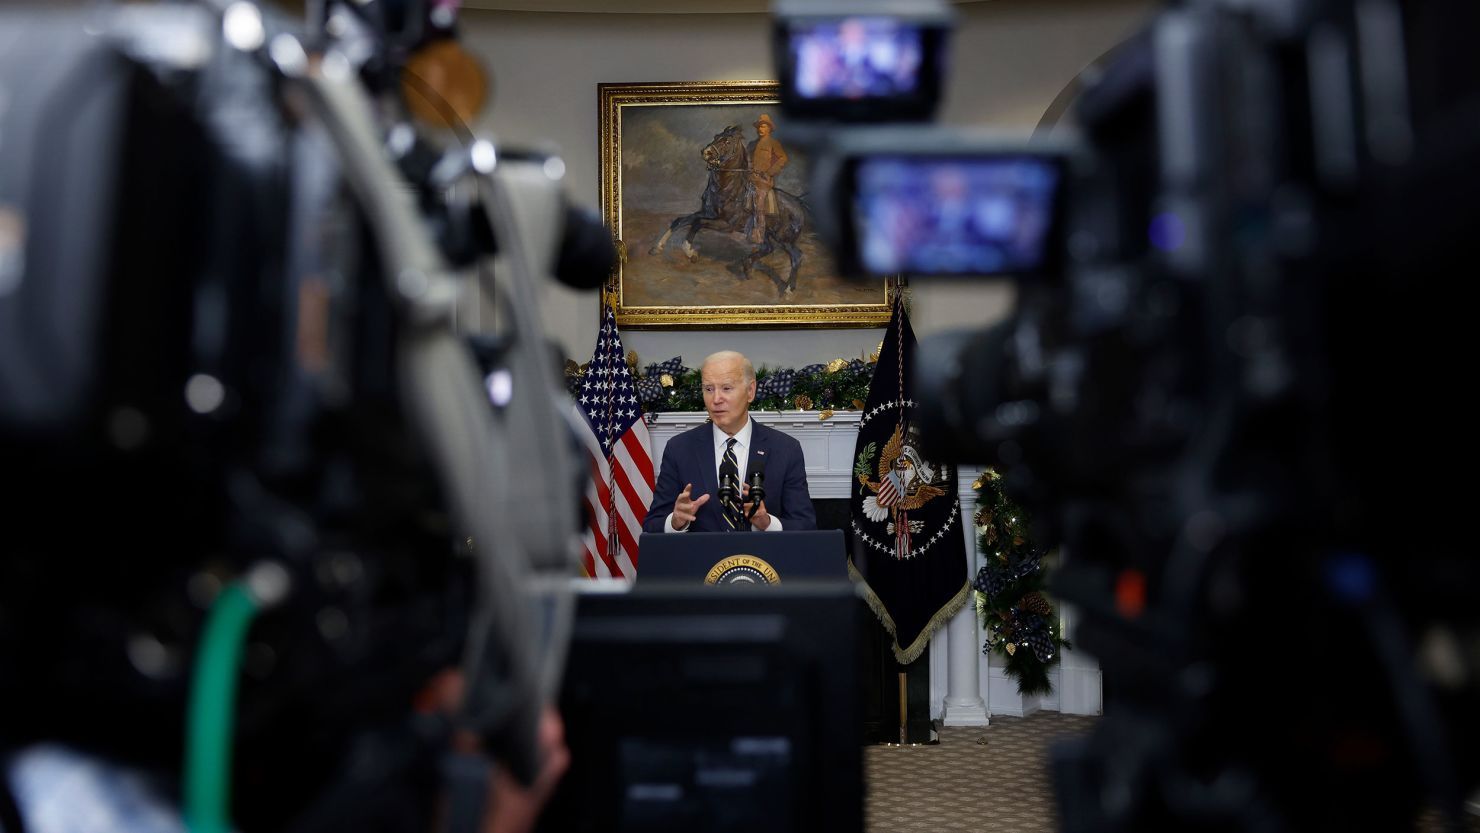 WASHINGTON, DC - DECEMBER 06: Framed by television cameras, U.S. President Joe Biden delivers a statement urging Congress to pass his national security supplemental from the Roosevelt Room at the White House on December 06, 2023 in Washington, DC. Following a virtual meeting with G7 leaders and Ukrainian President Volodymyr Zelensky, Biden called on Congress to take action on the security budget supplemental request which includes funding to support Israel, Ukraine and added security along the U.S.-Mexico border. (Photo by Anna Moneymaker/Getty Images)